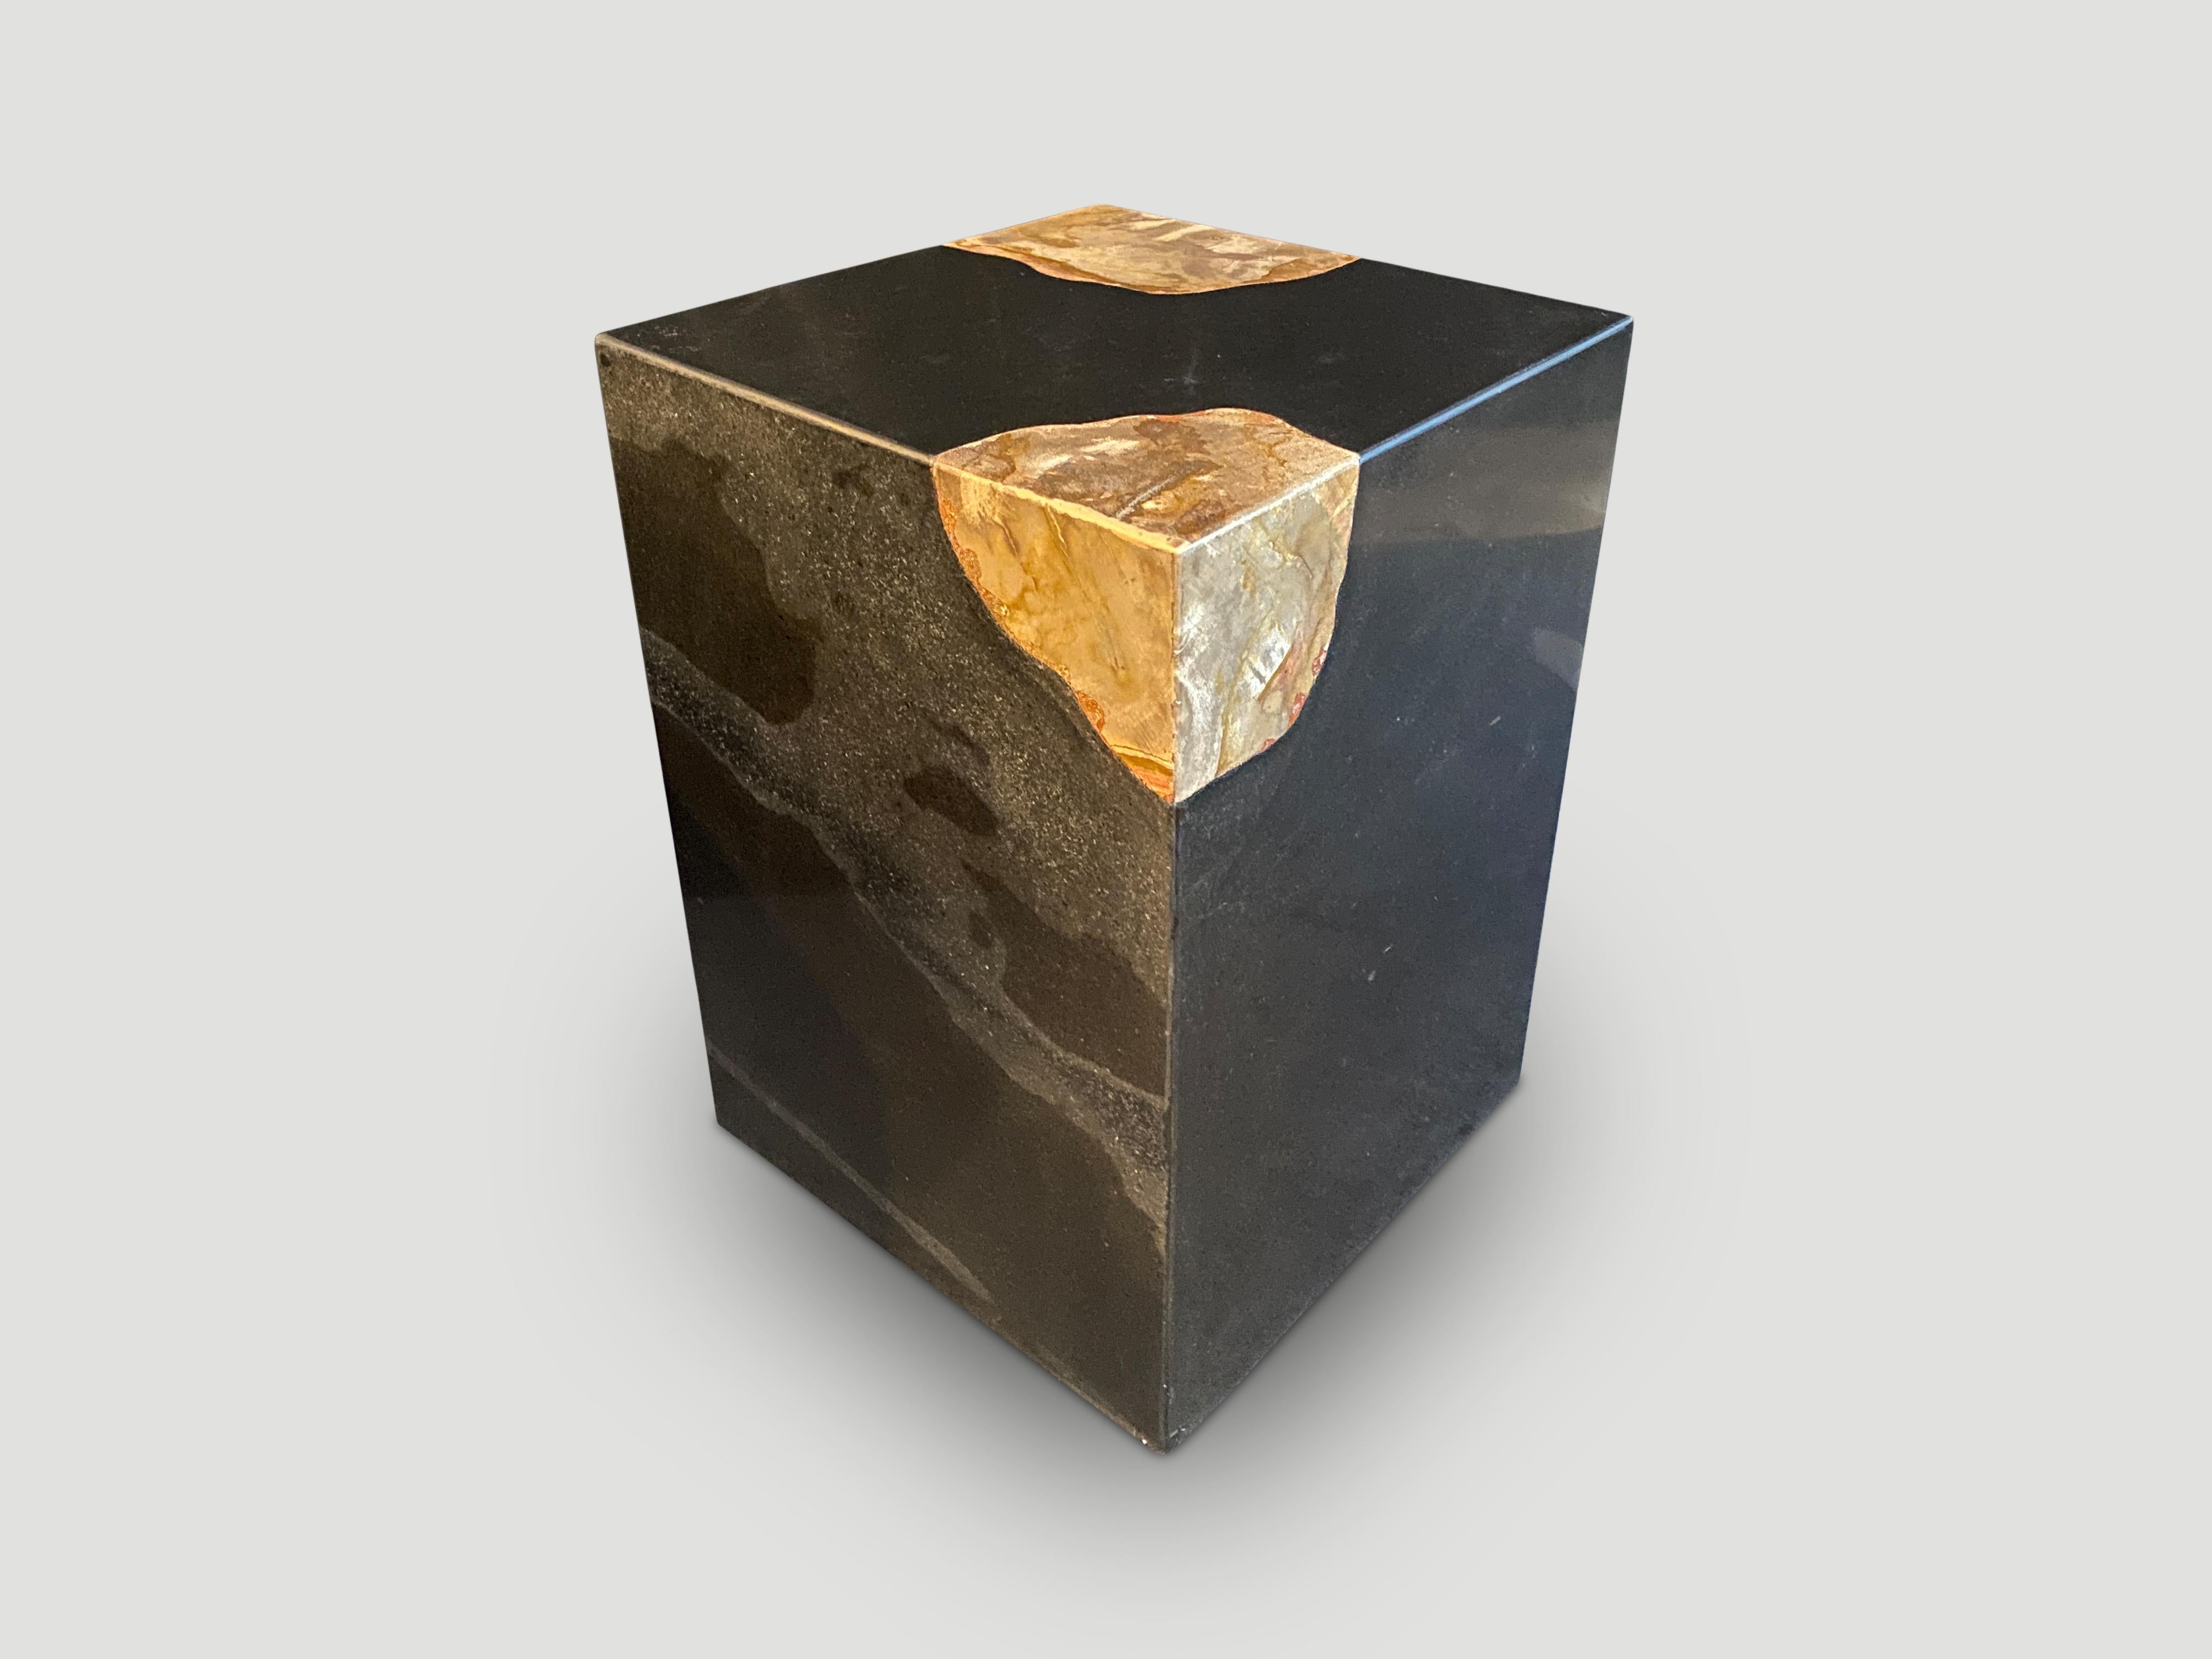 Volcanic stone panels are joined together with a contrasting tone of petrified wood added on two corners. Modern yet with so much history. 

Own an Andrianna Shamaris original.

Andrianna Shamaris. The Leader In Modern Organic Design.